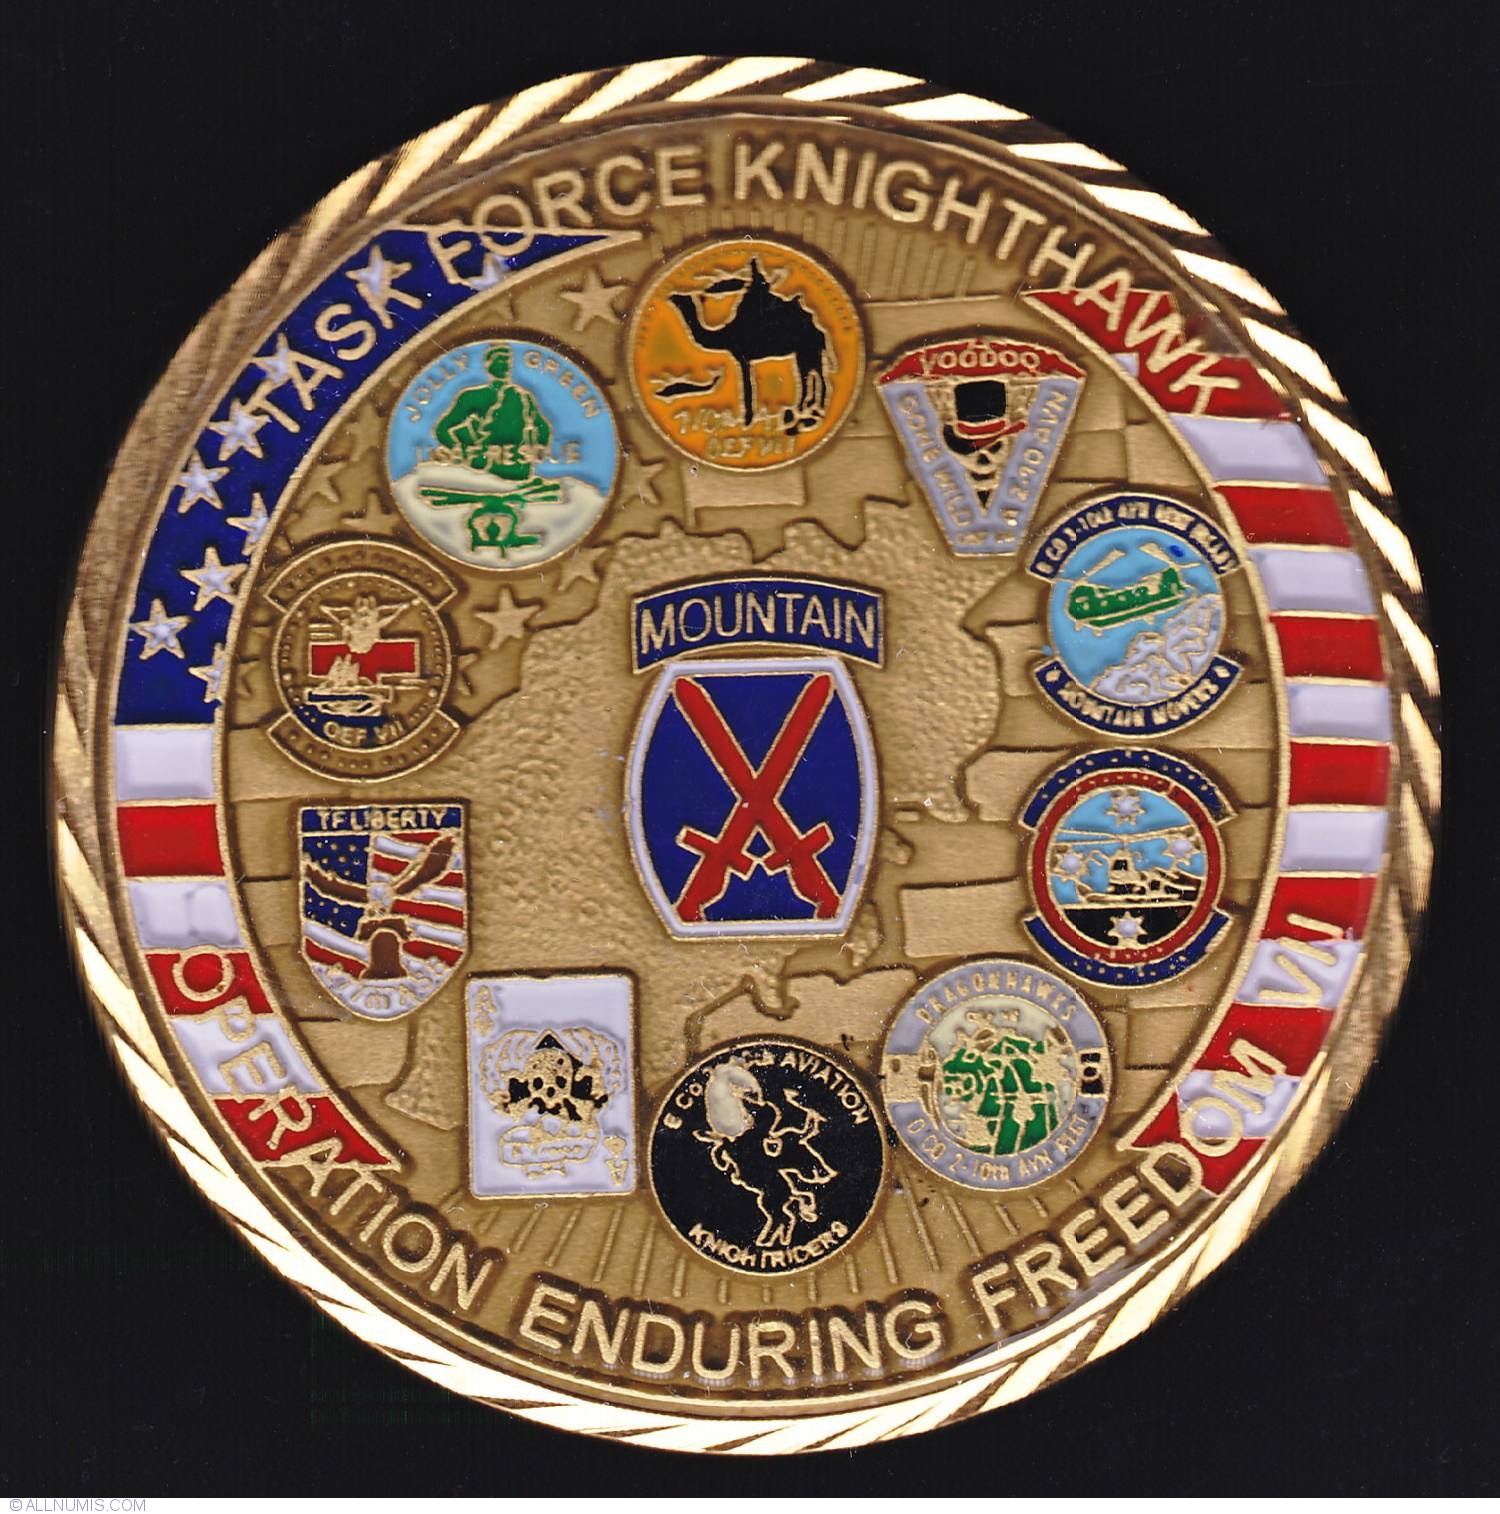 Op Enduring Freedom VII Task Force Knighthawk, Military Challenge